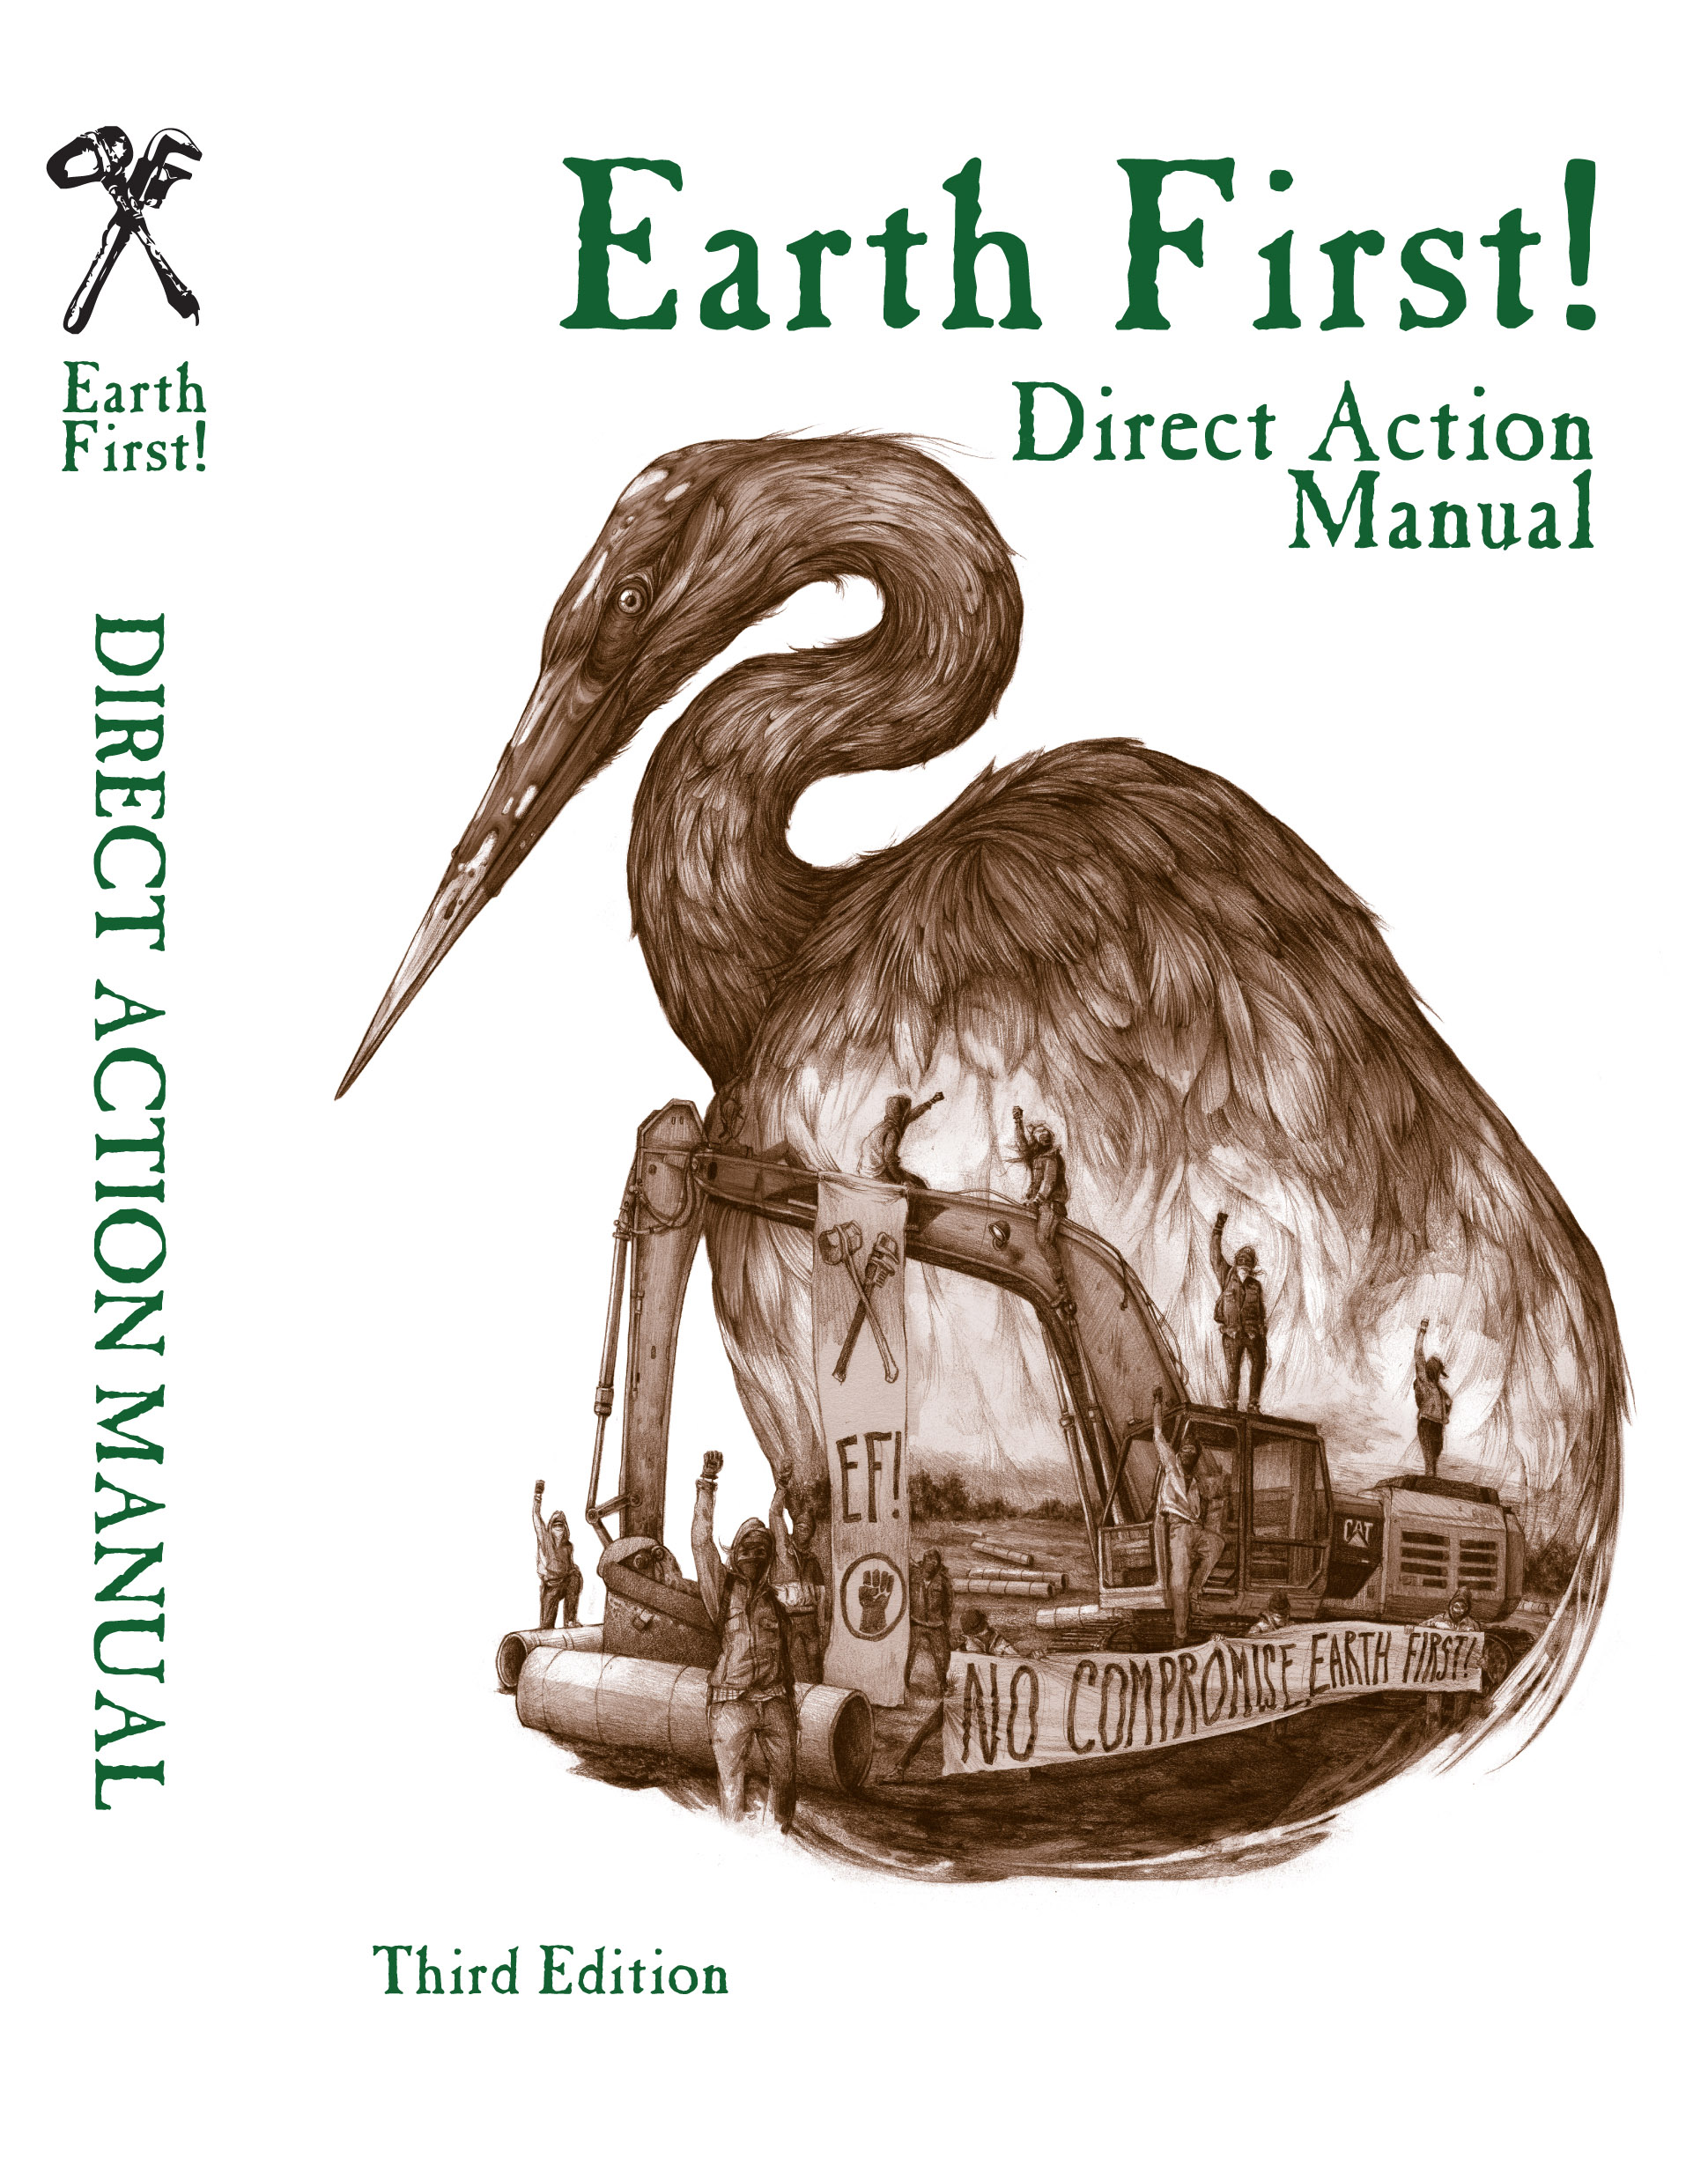 Earth First! Direct Action Manual